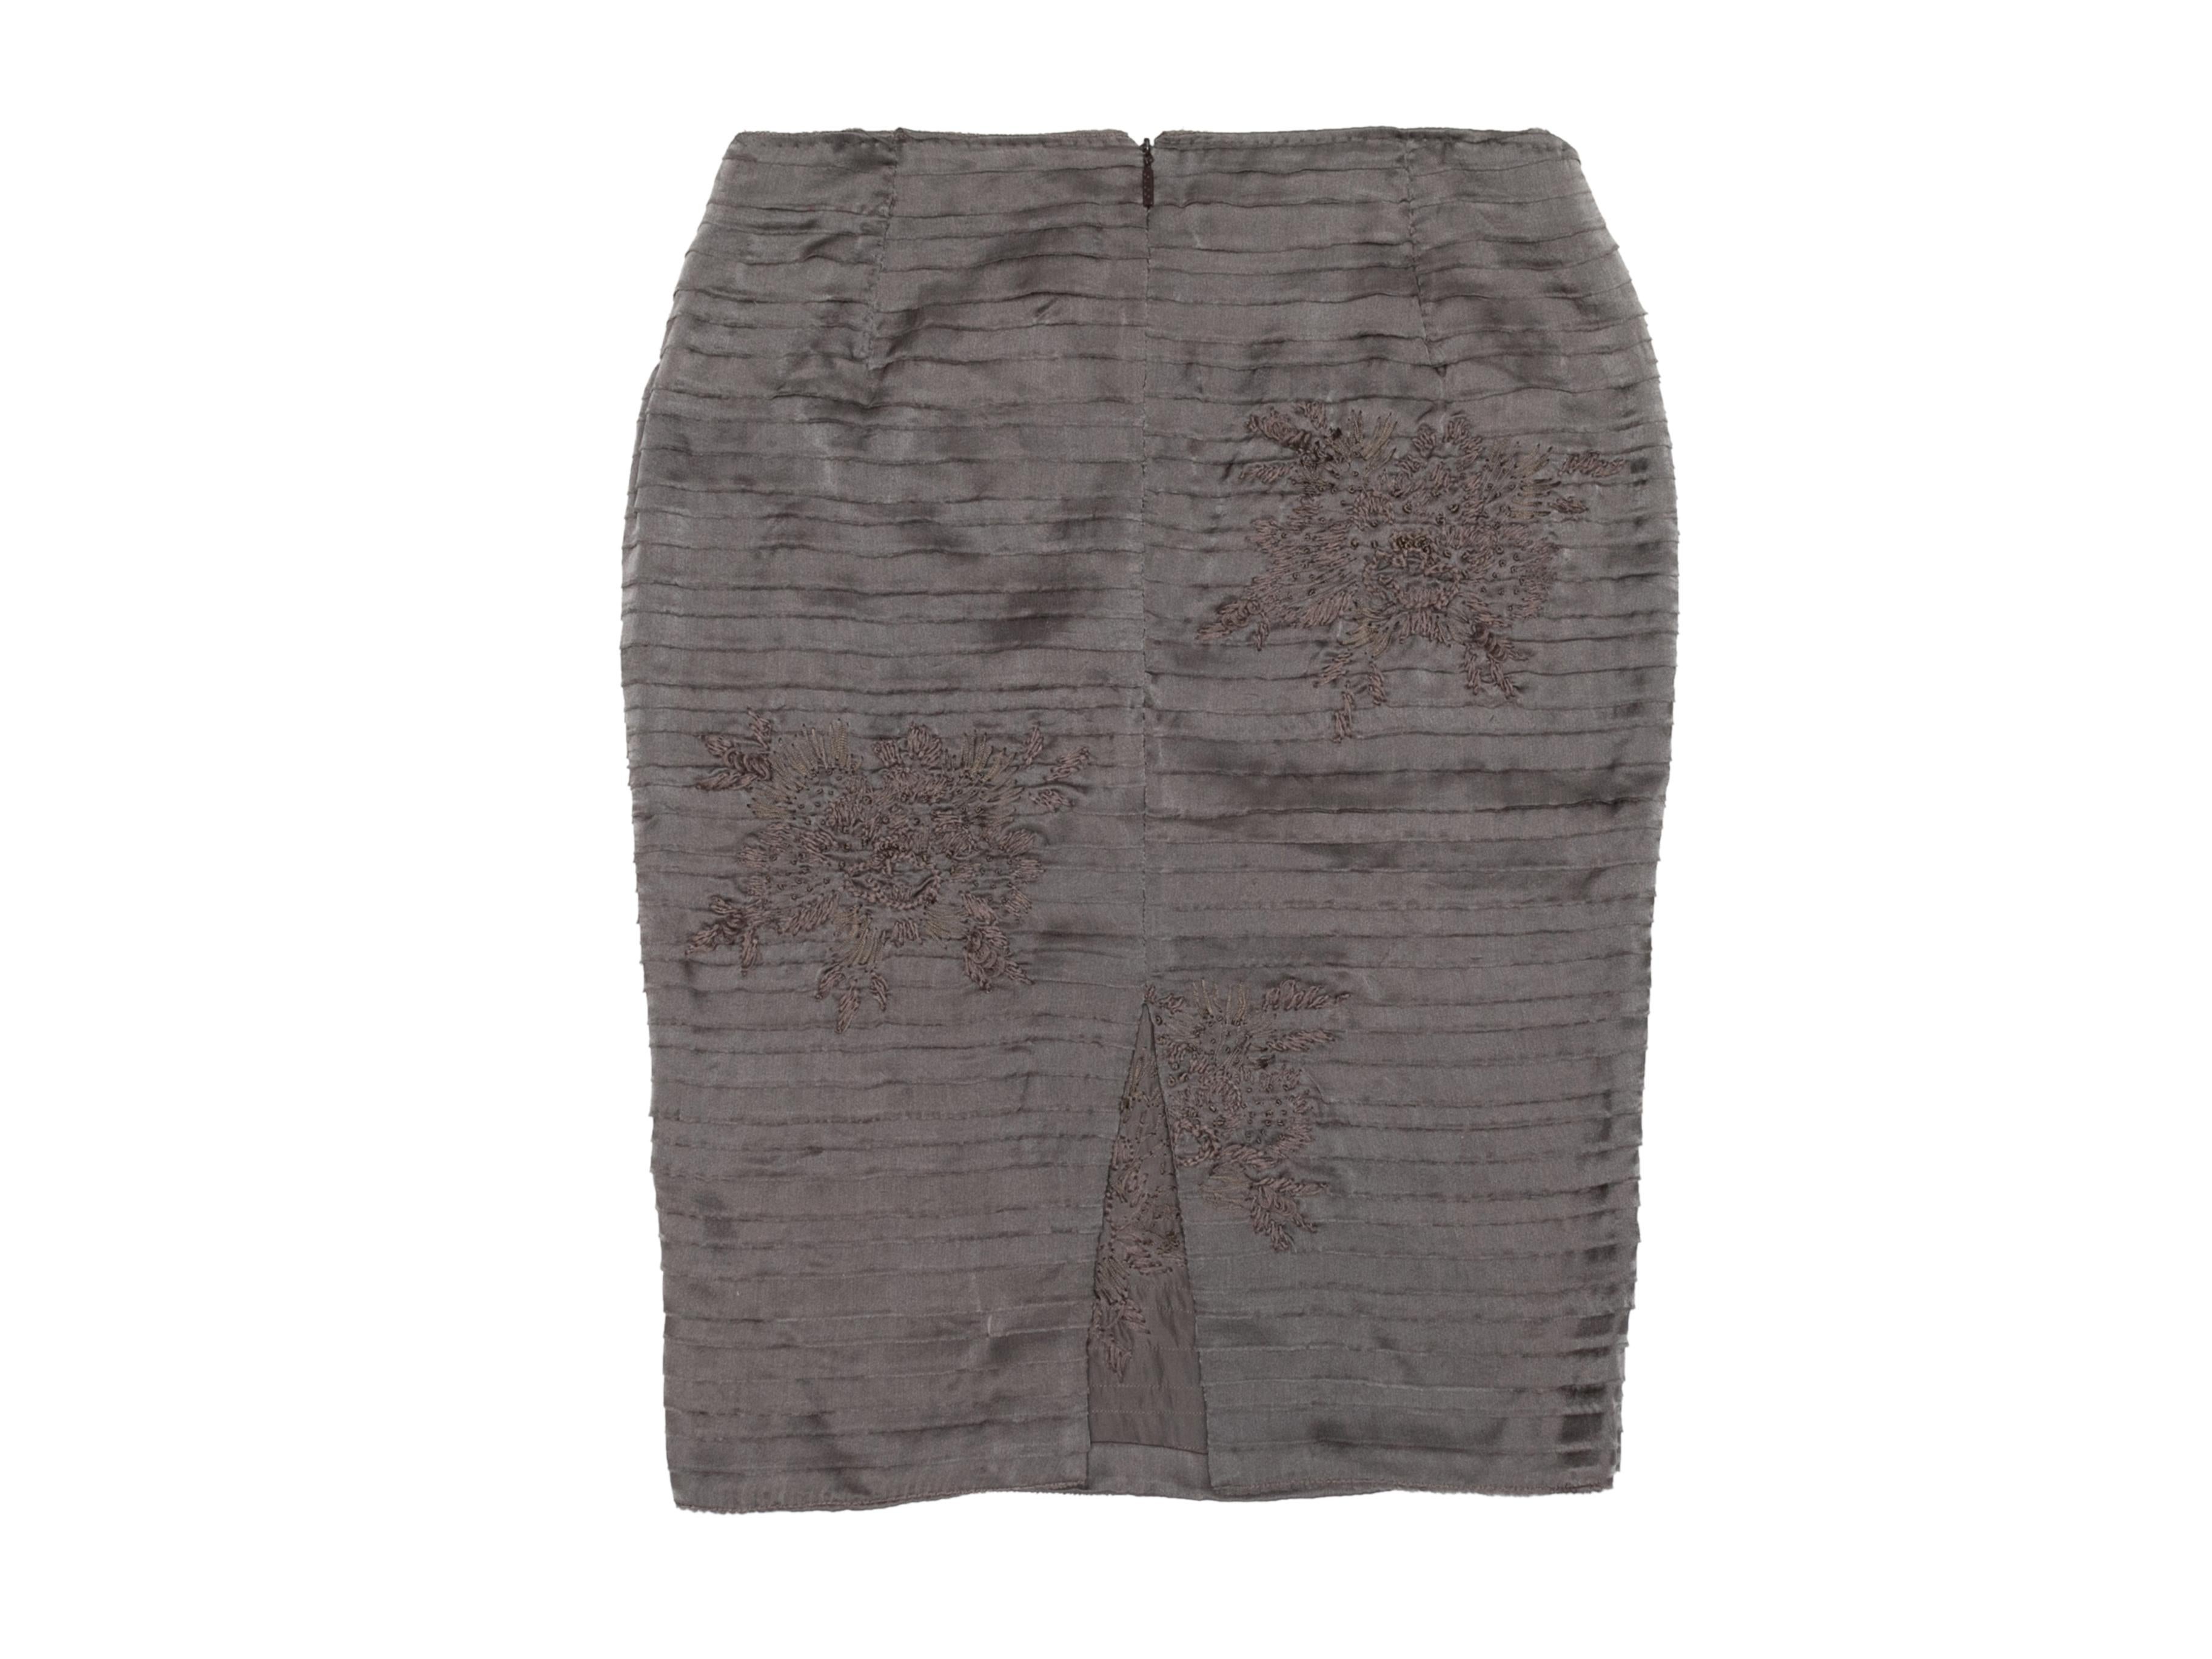 Grey Pleated silk skirt by Gucci. Floral embroidery throughout. Zip closure at back. 26